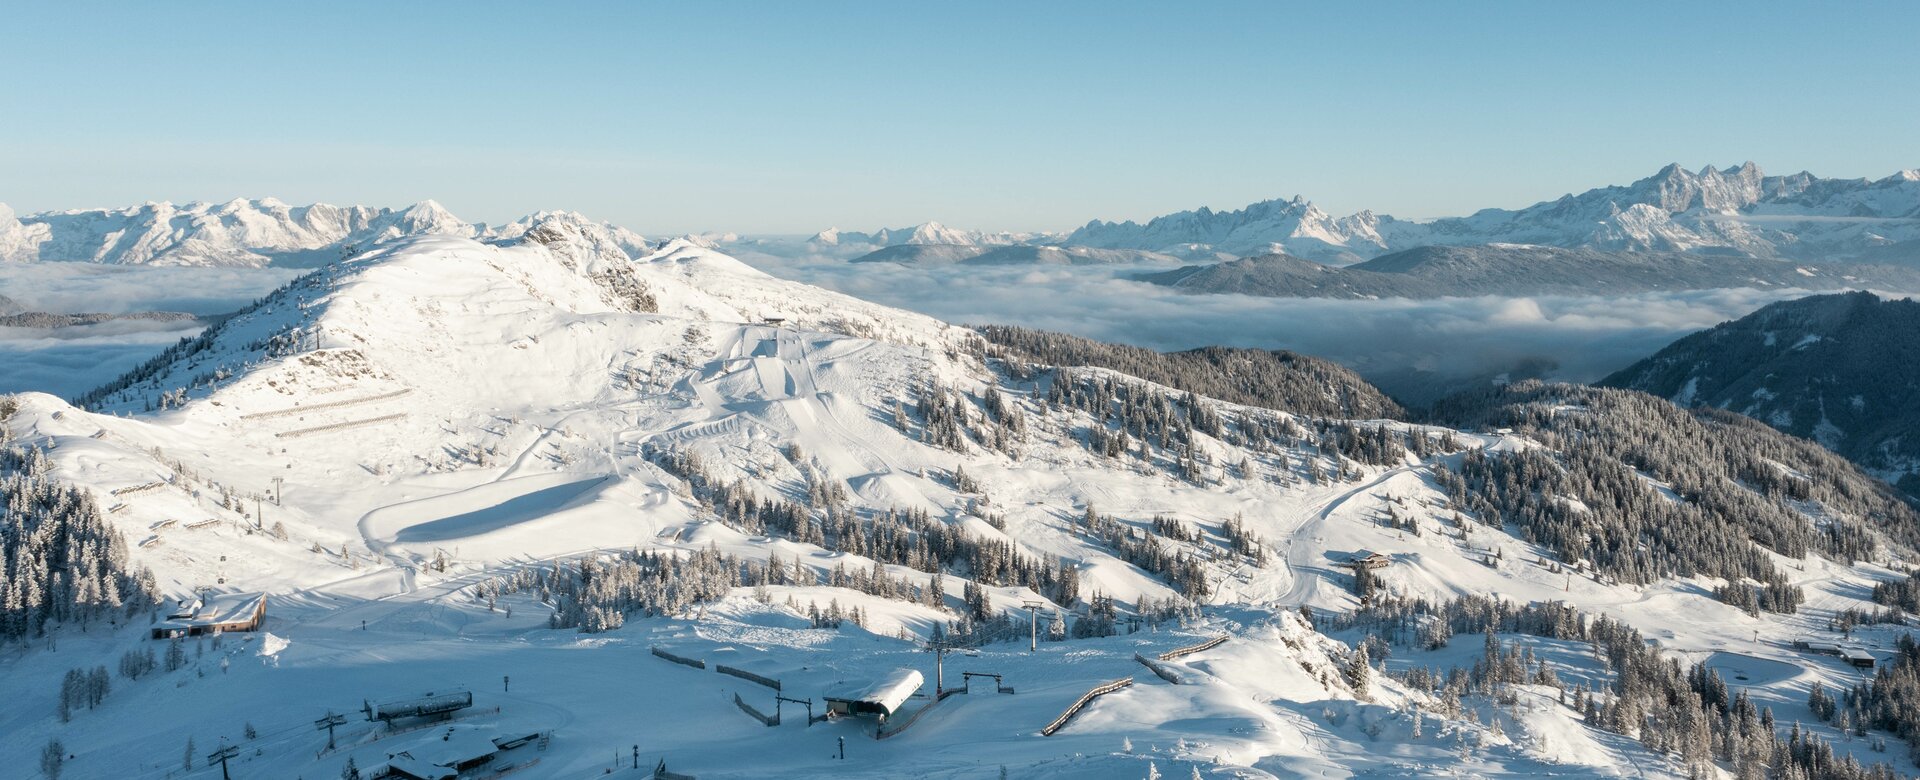 Snowy ski area from above with various lifts and slopes | © Shuttleberg GmbH & Co KG